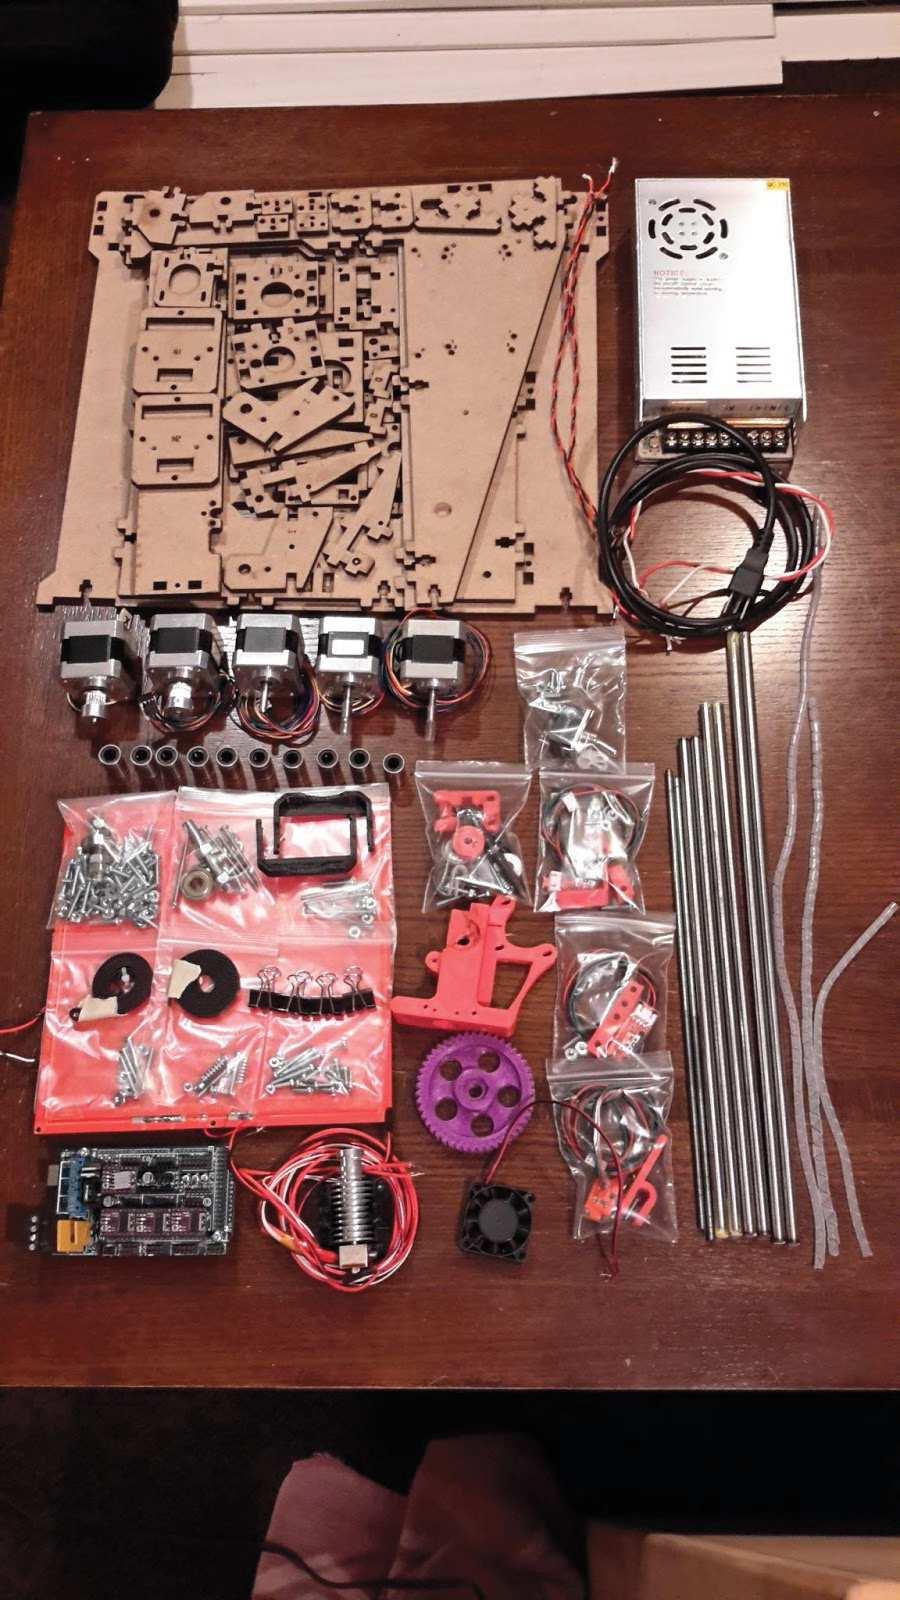 Build your own desktop 3D printer This is a kit containing all materials and software to build and operate a 3D Printer.